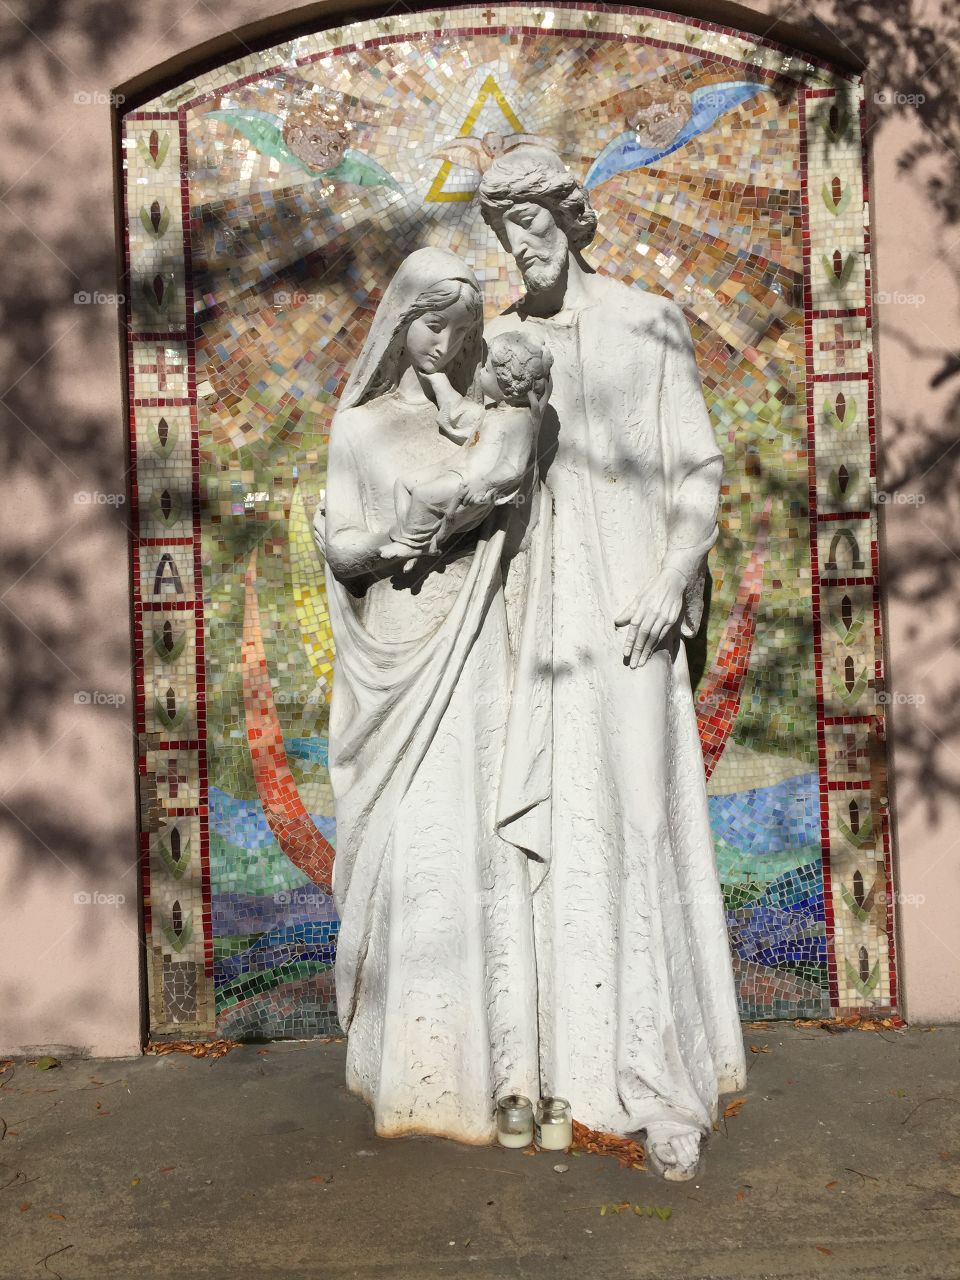 Picture of Mother Mary carrying baby Jesus alongside father Joseph as statutes. This art reflects upon Christianity Jane religion. The family is under the holy trinity .the sculpture are monuments to the Lords good news .